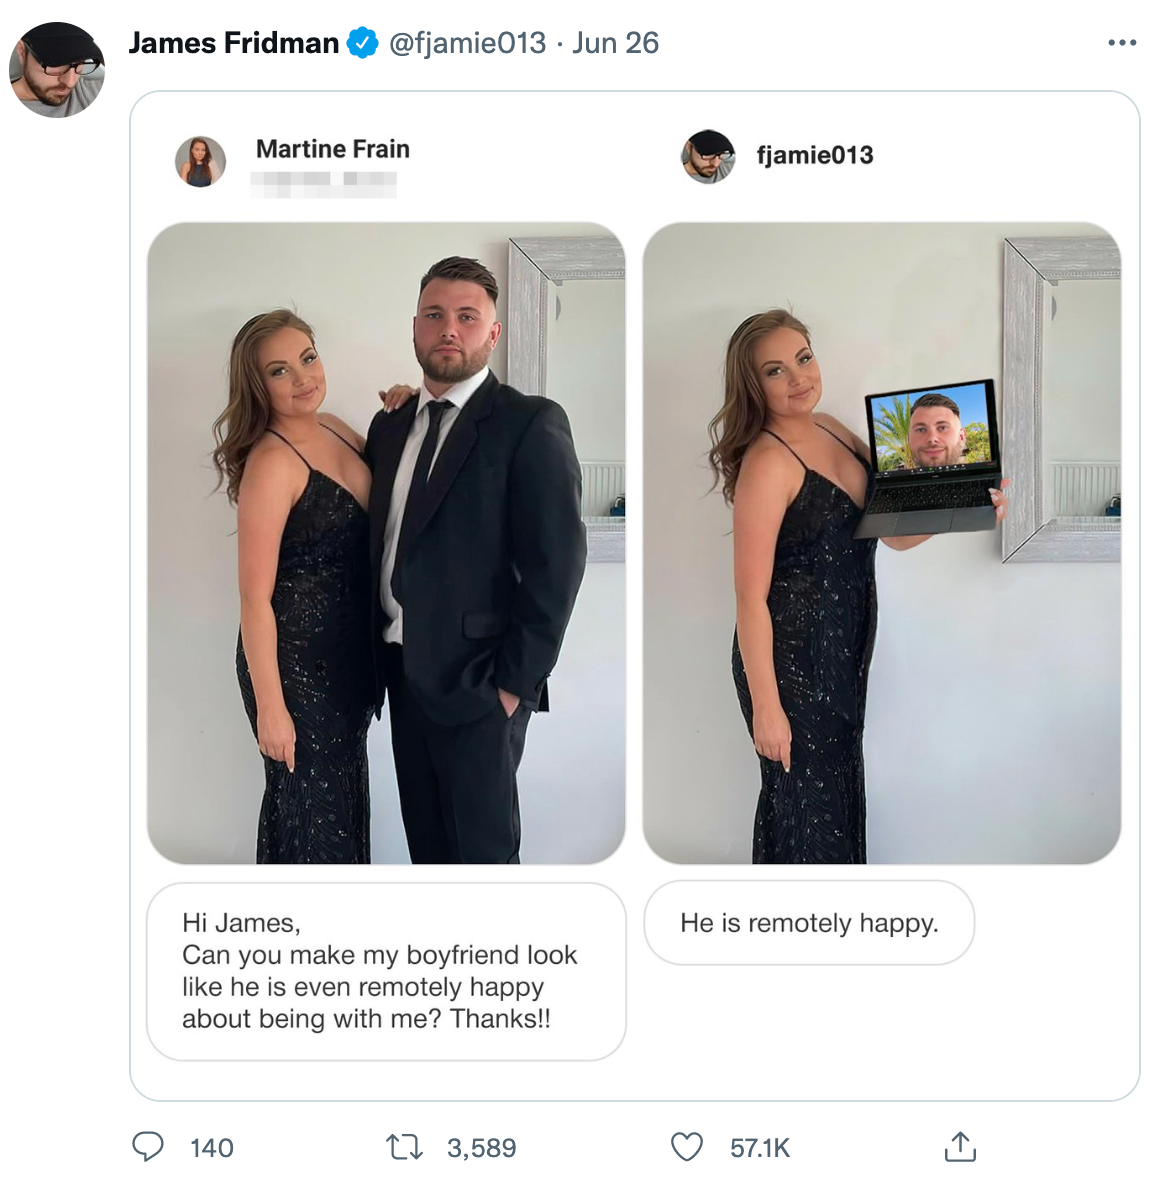 wholesome photoshop edits - photoshop troll james fridman - James Fridman Jun 26 Martine Frain Hi James, Can you make my boyfriend look he is even remotely happy about being with me? Thanks!! 140 13,589 fjamie013 He is remotely happy.